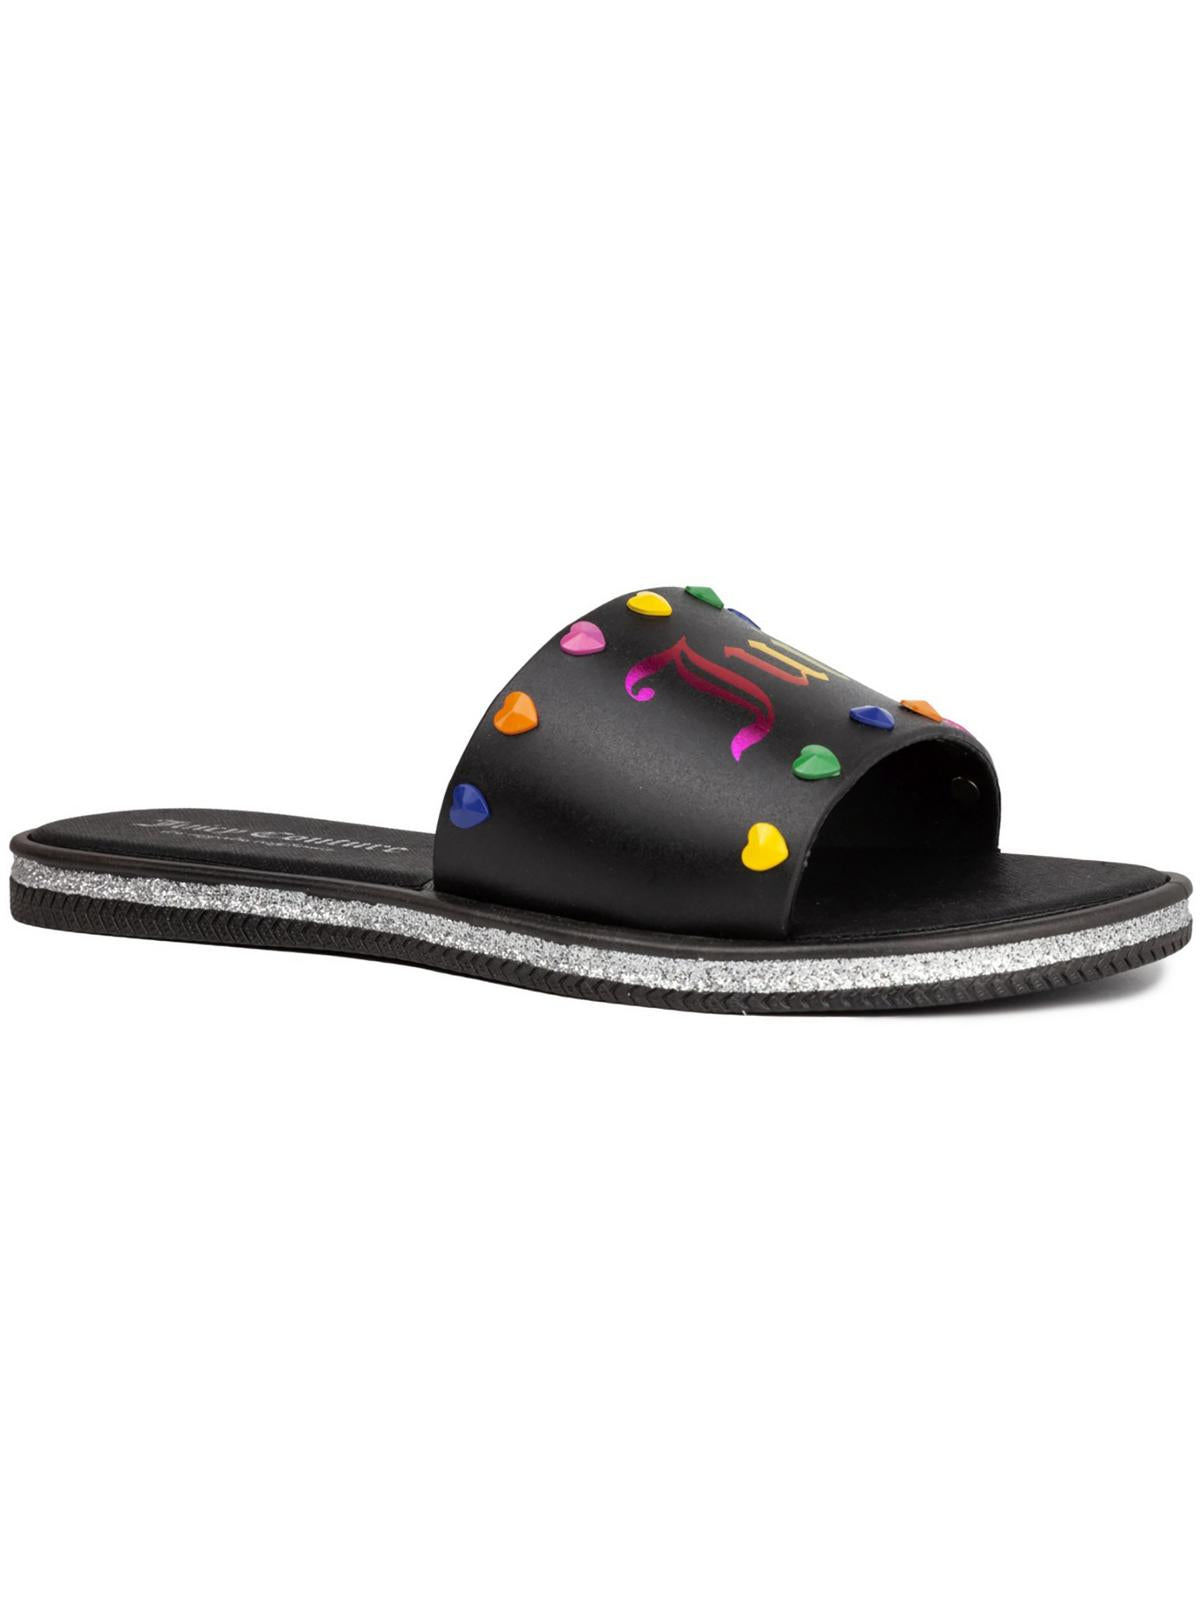 Shop Juicy Couture You Bet Sandal Womens Slip On Casual Flatform Sandals In Multi